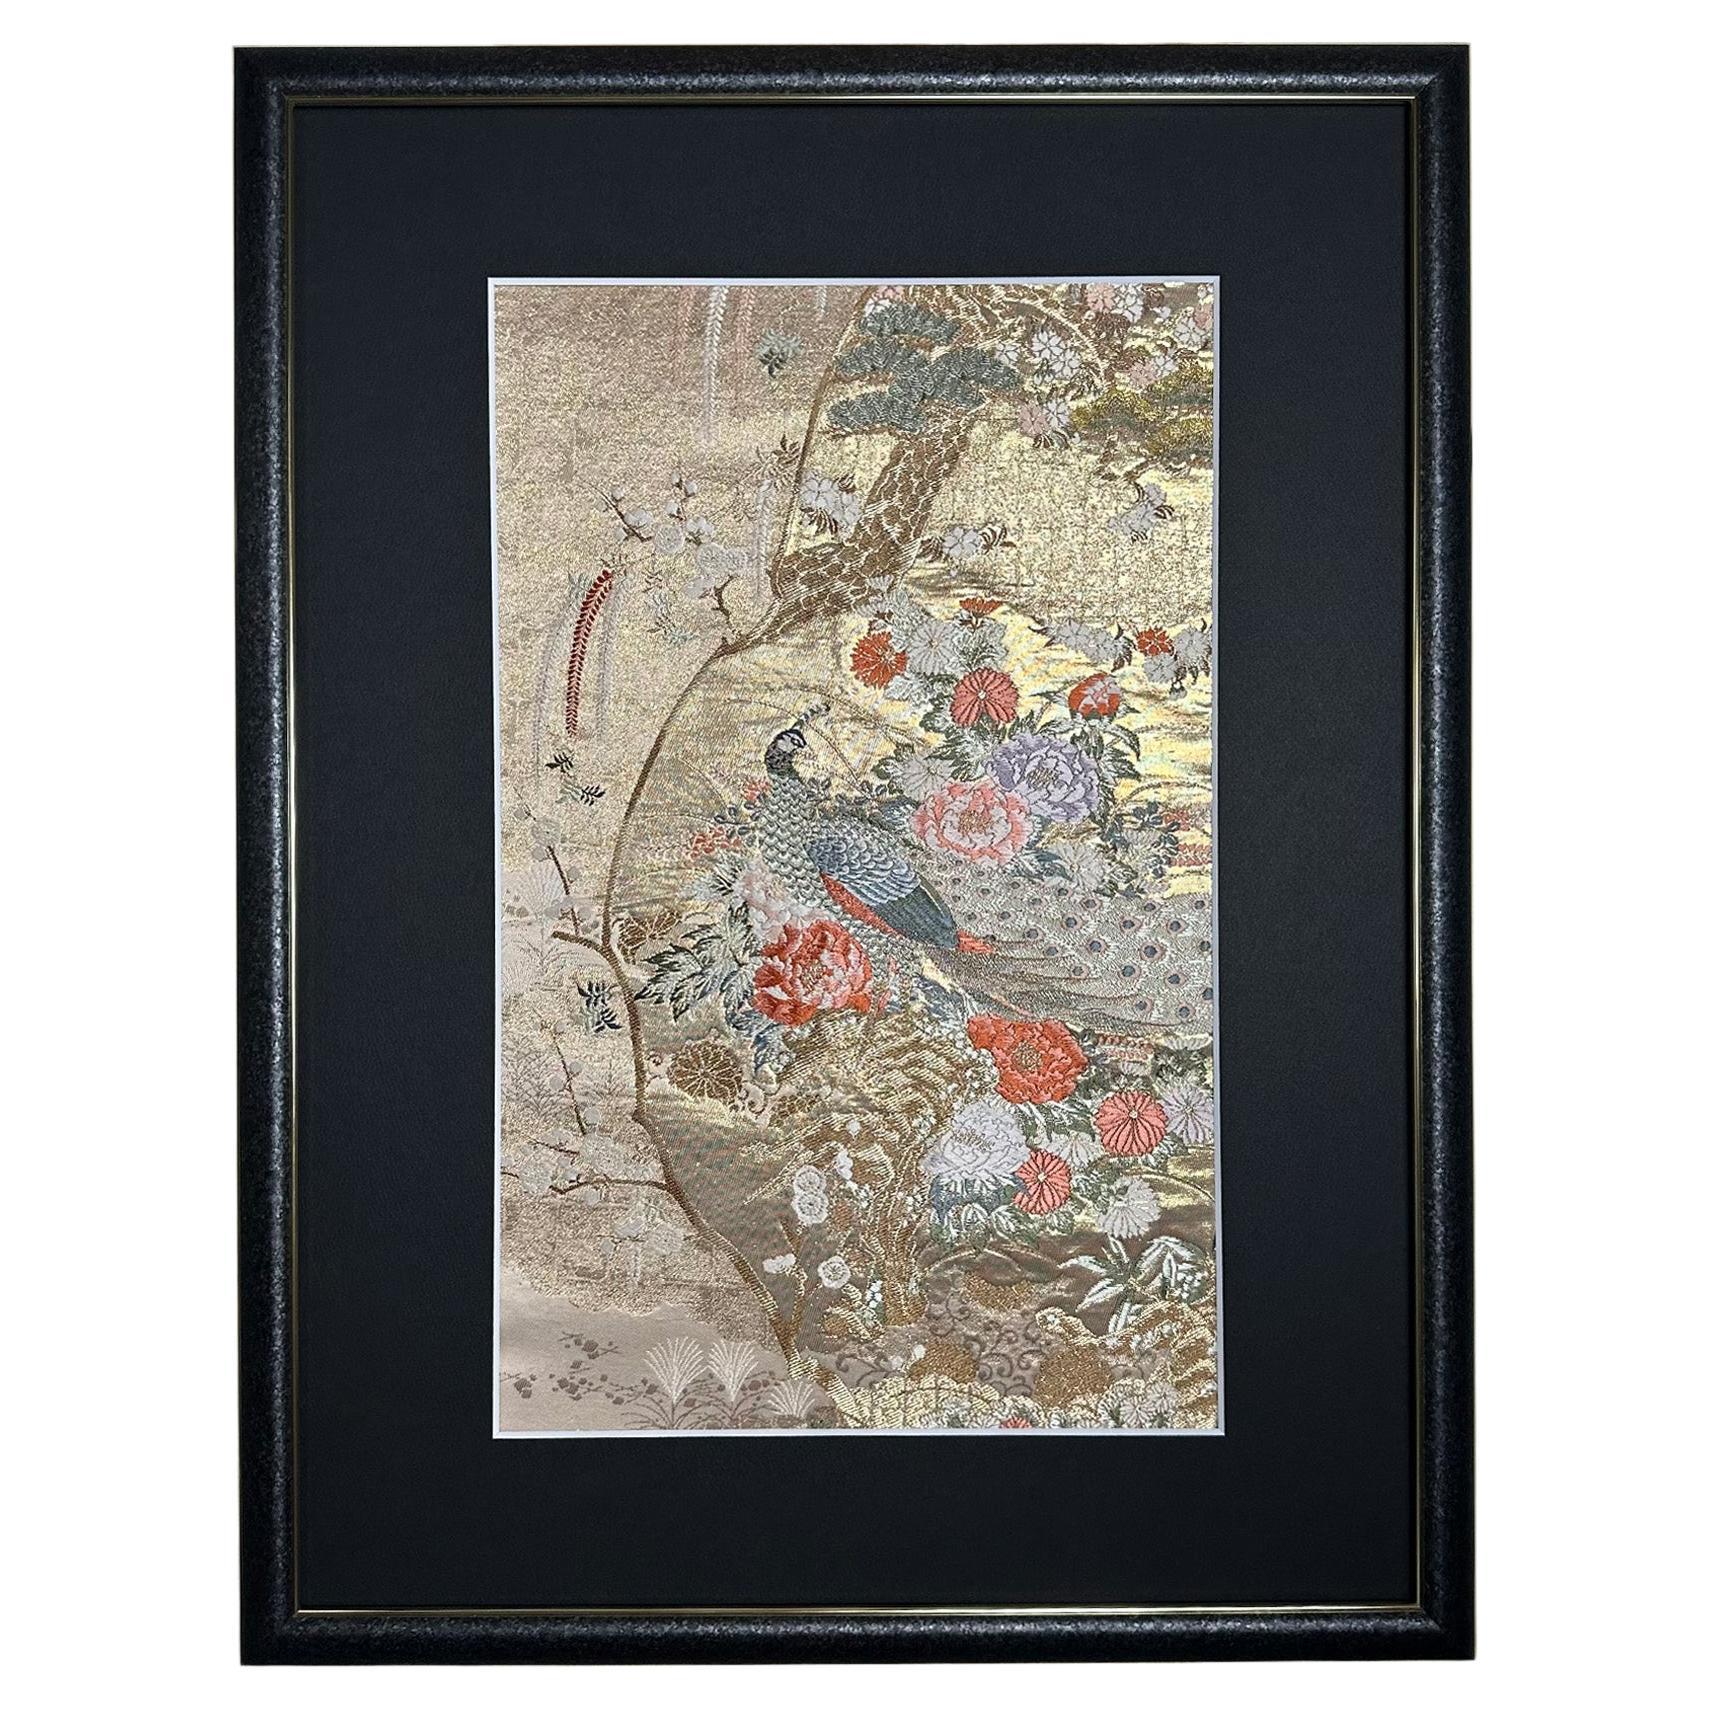 Framed Kimono Art, "The Queen of Peacocks" by Kimono-Couture, Japanese Wall Art For Sale